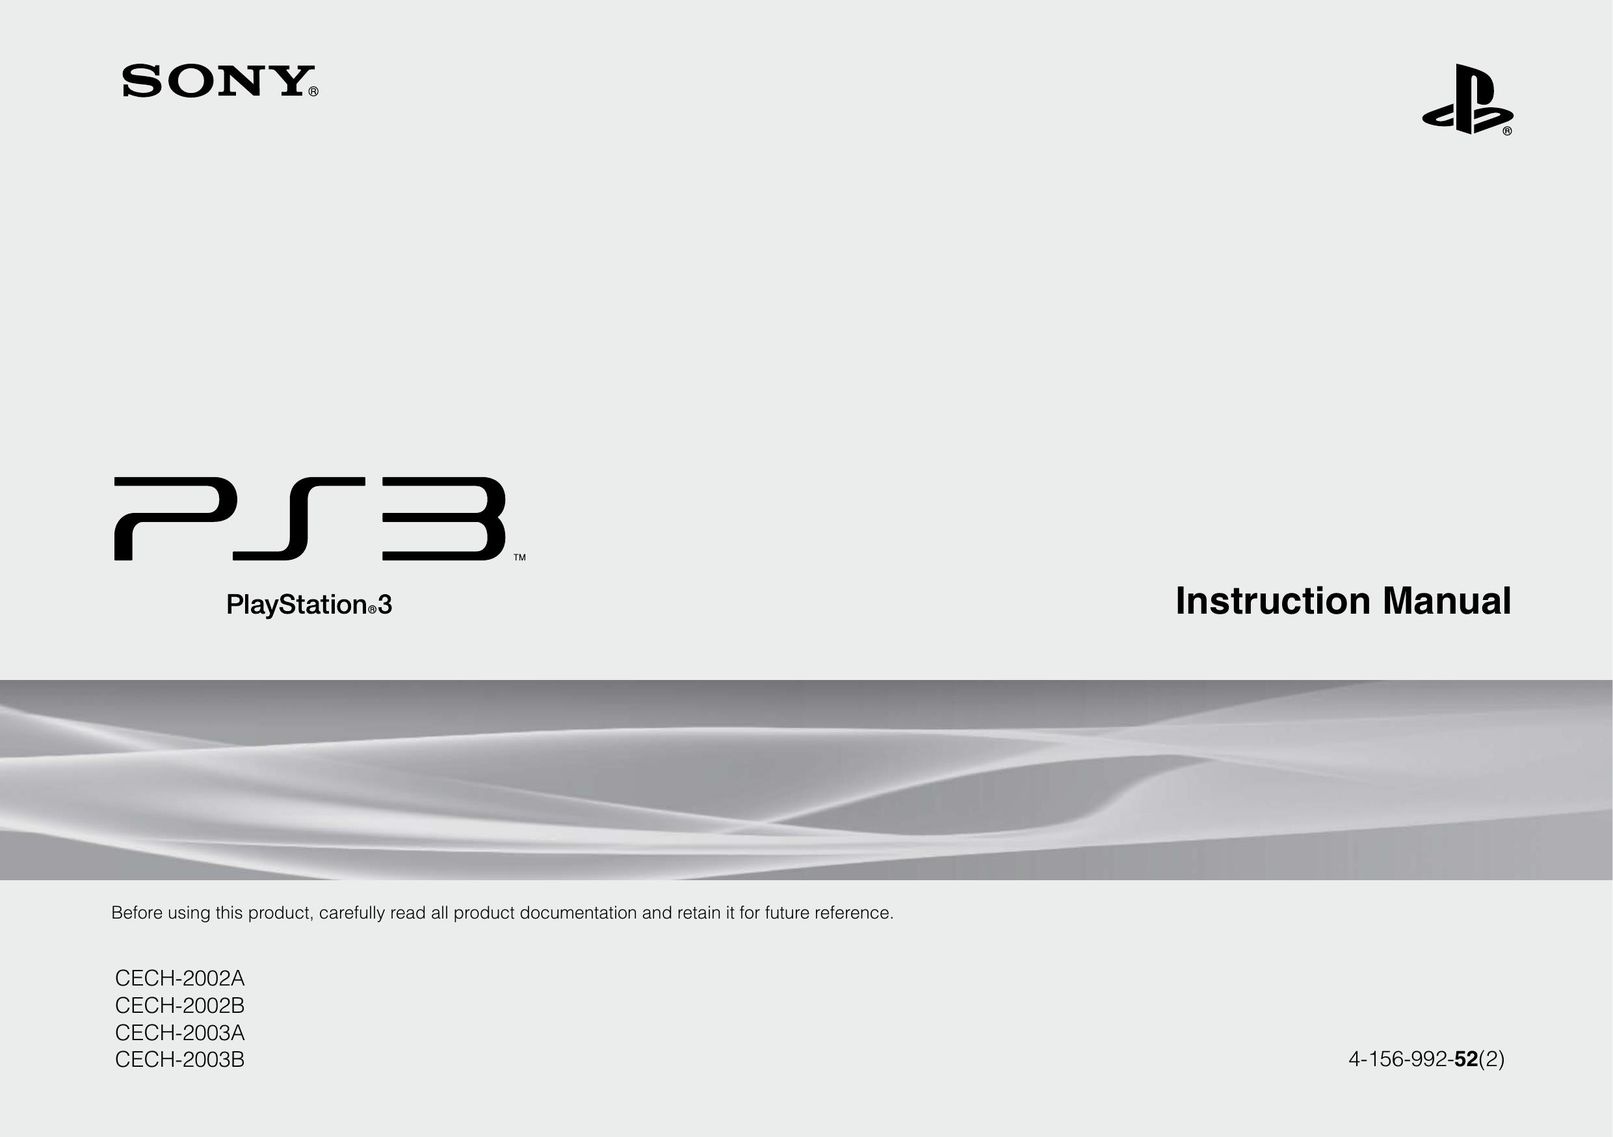 Sony CECH-2002A Video Game Console User Manual